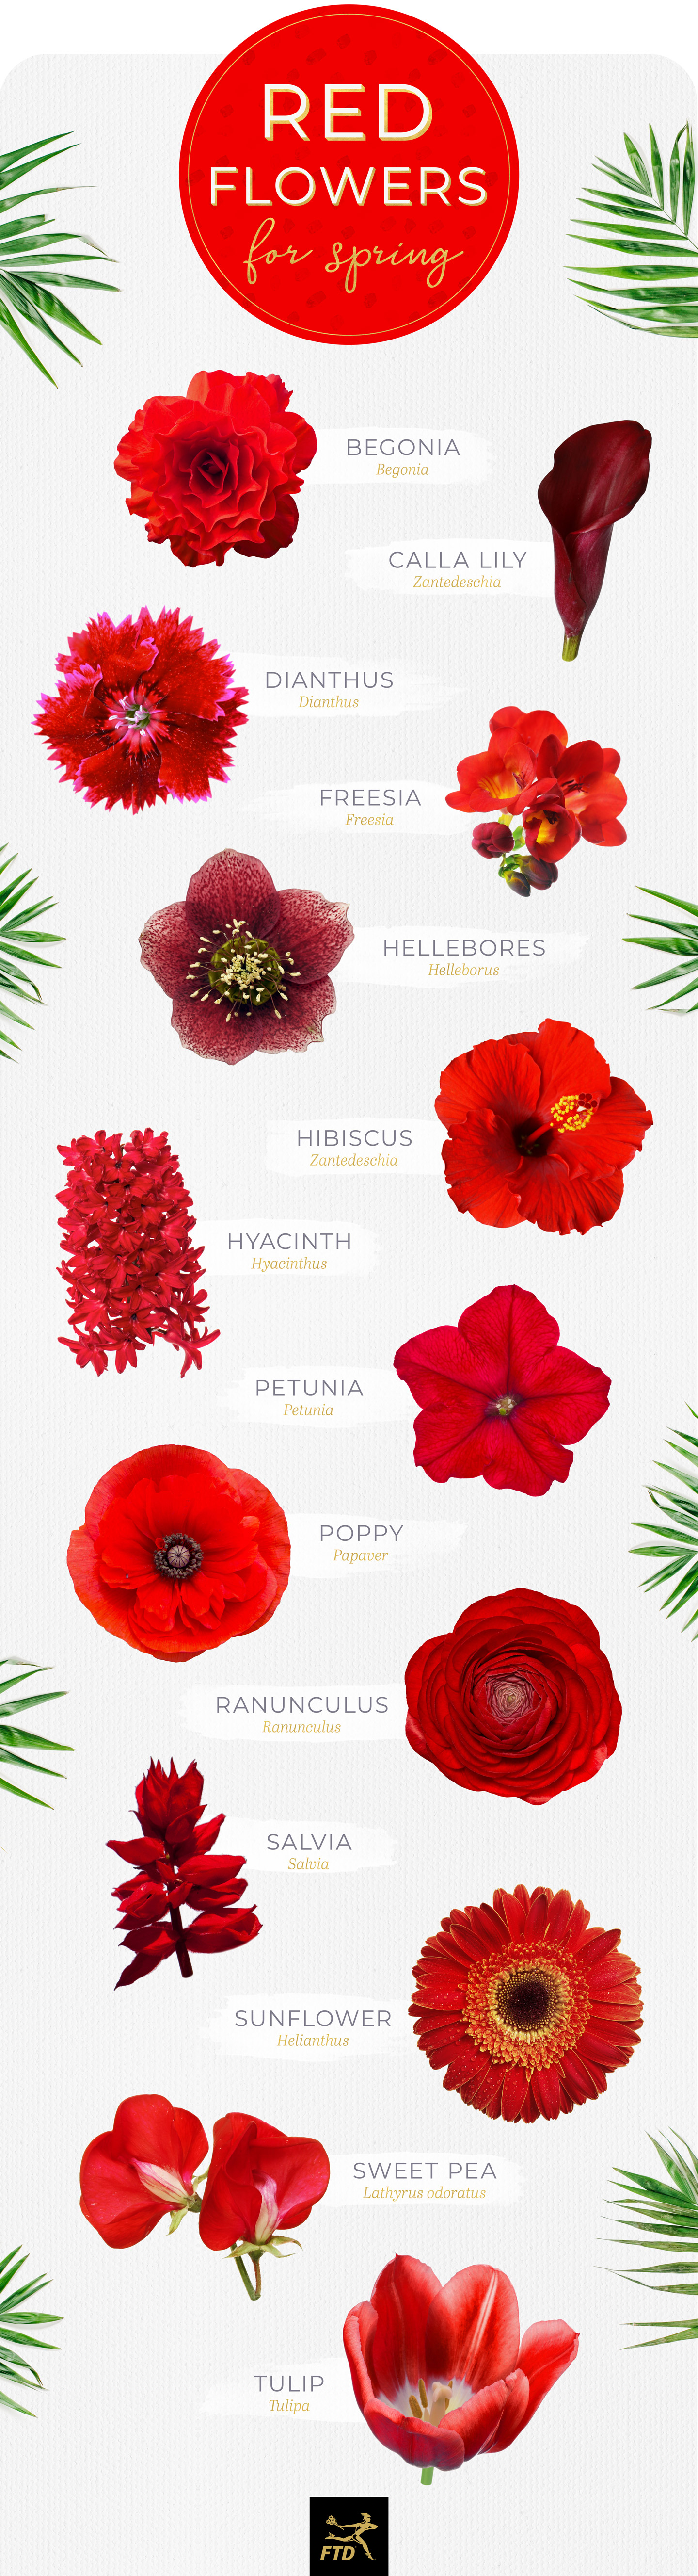 red flowers names list